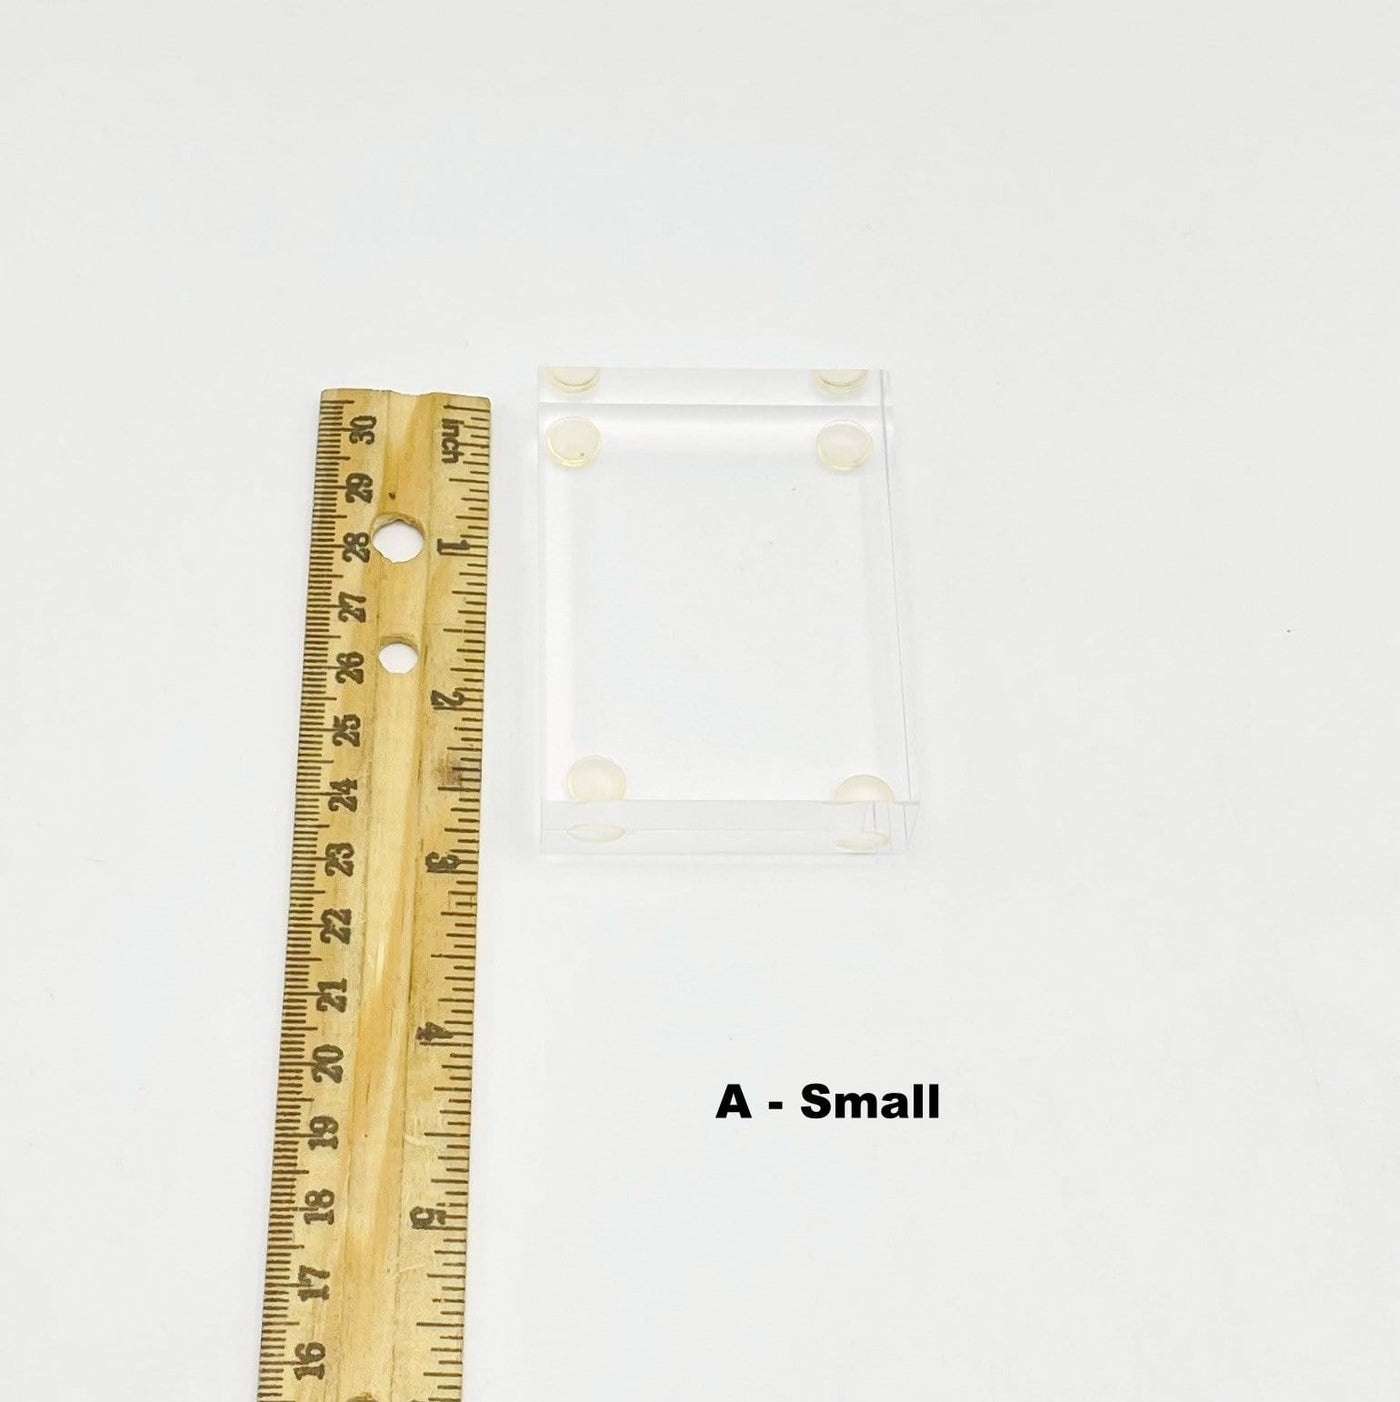 small thick acrylic crystal display stand next to a ruler for size reference